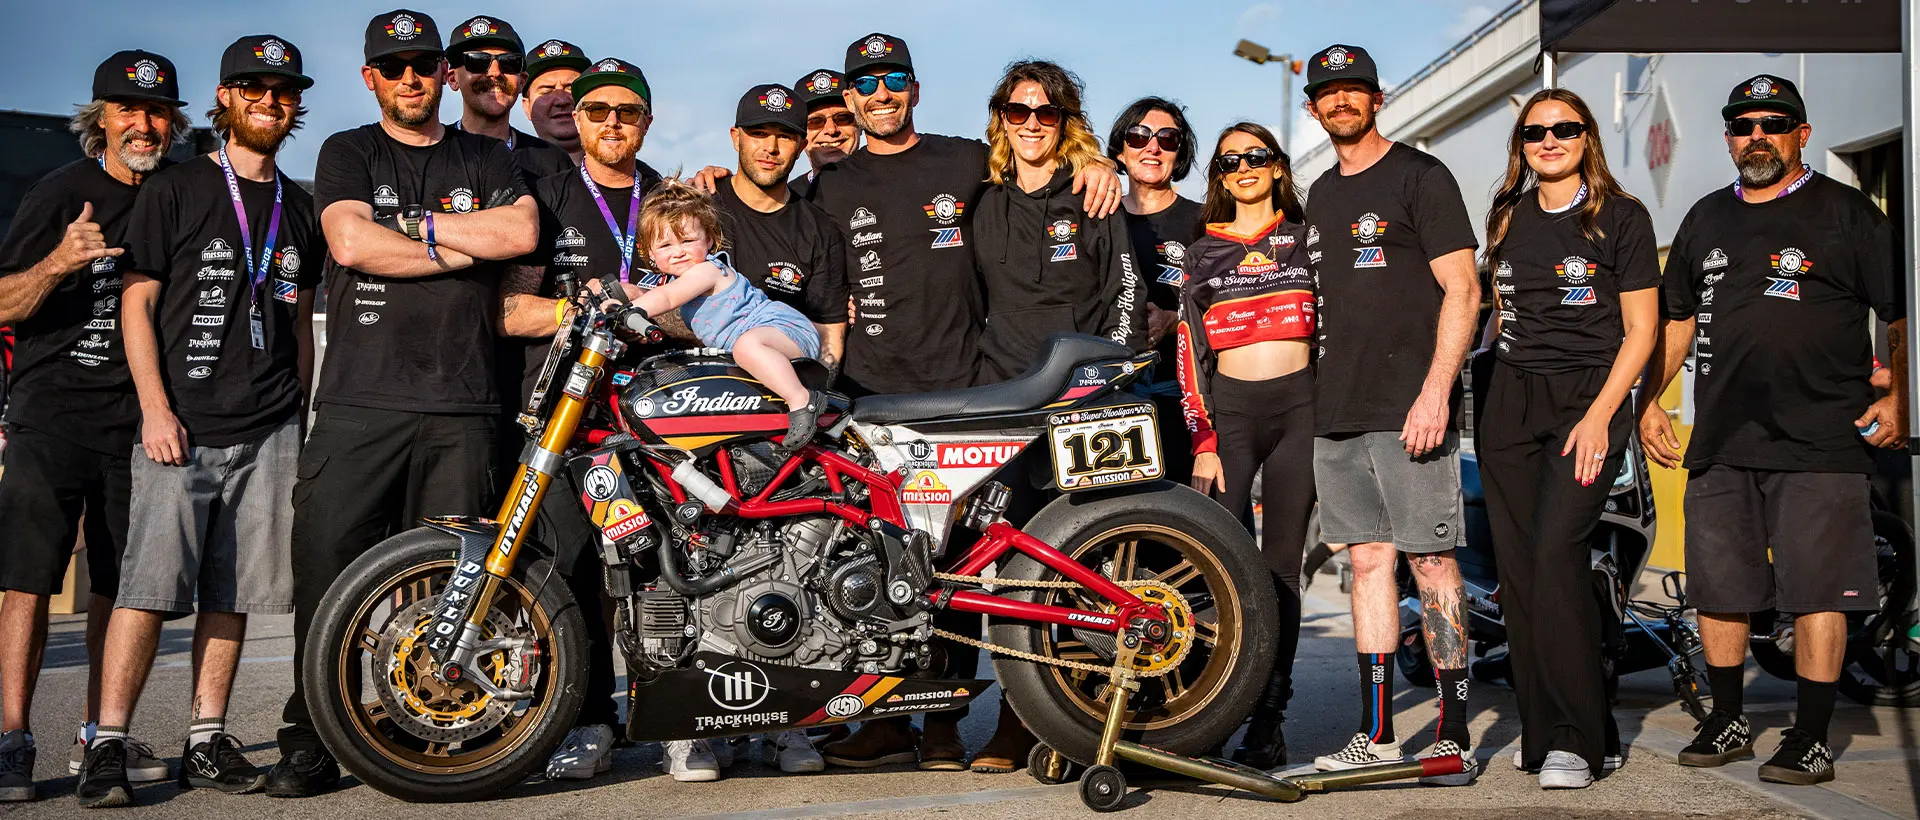 A group photo of the Roland Sands Design racing team at a motorcycle racing event. The team, wearing matching black T-shirts adorned with sponsor logos, gathers around a red and black Indian motorcycle. A young child sits on the motorcycle, surrounded by smiling team members in a celebratory atmosphere.